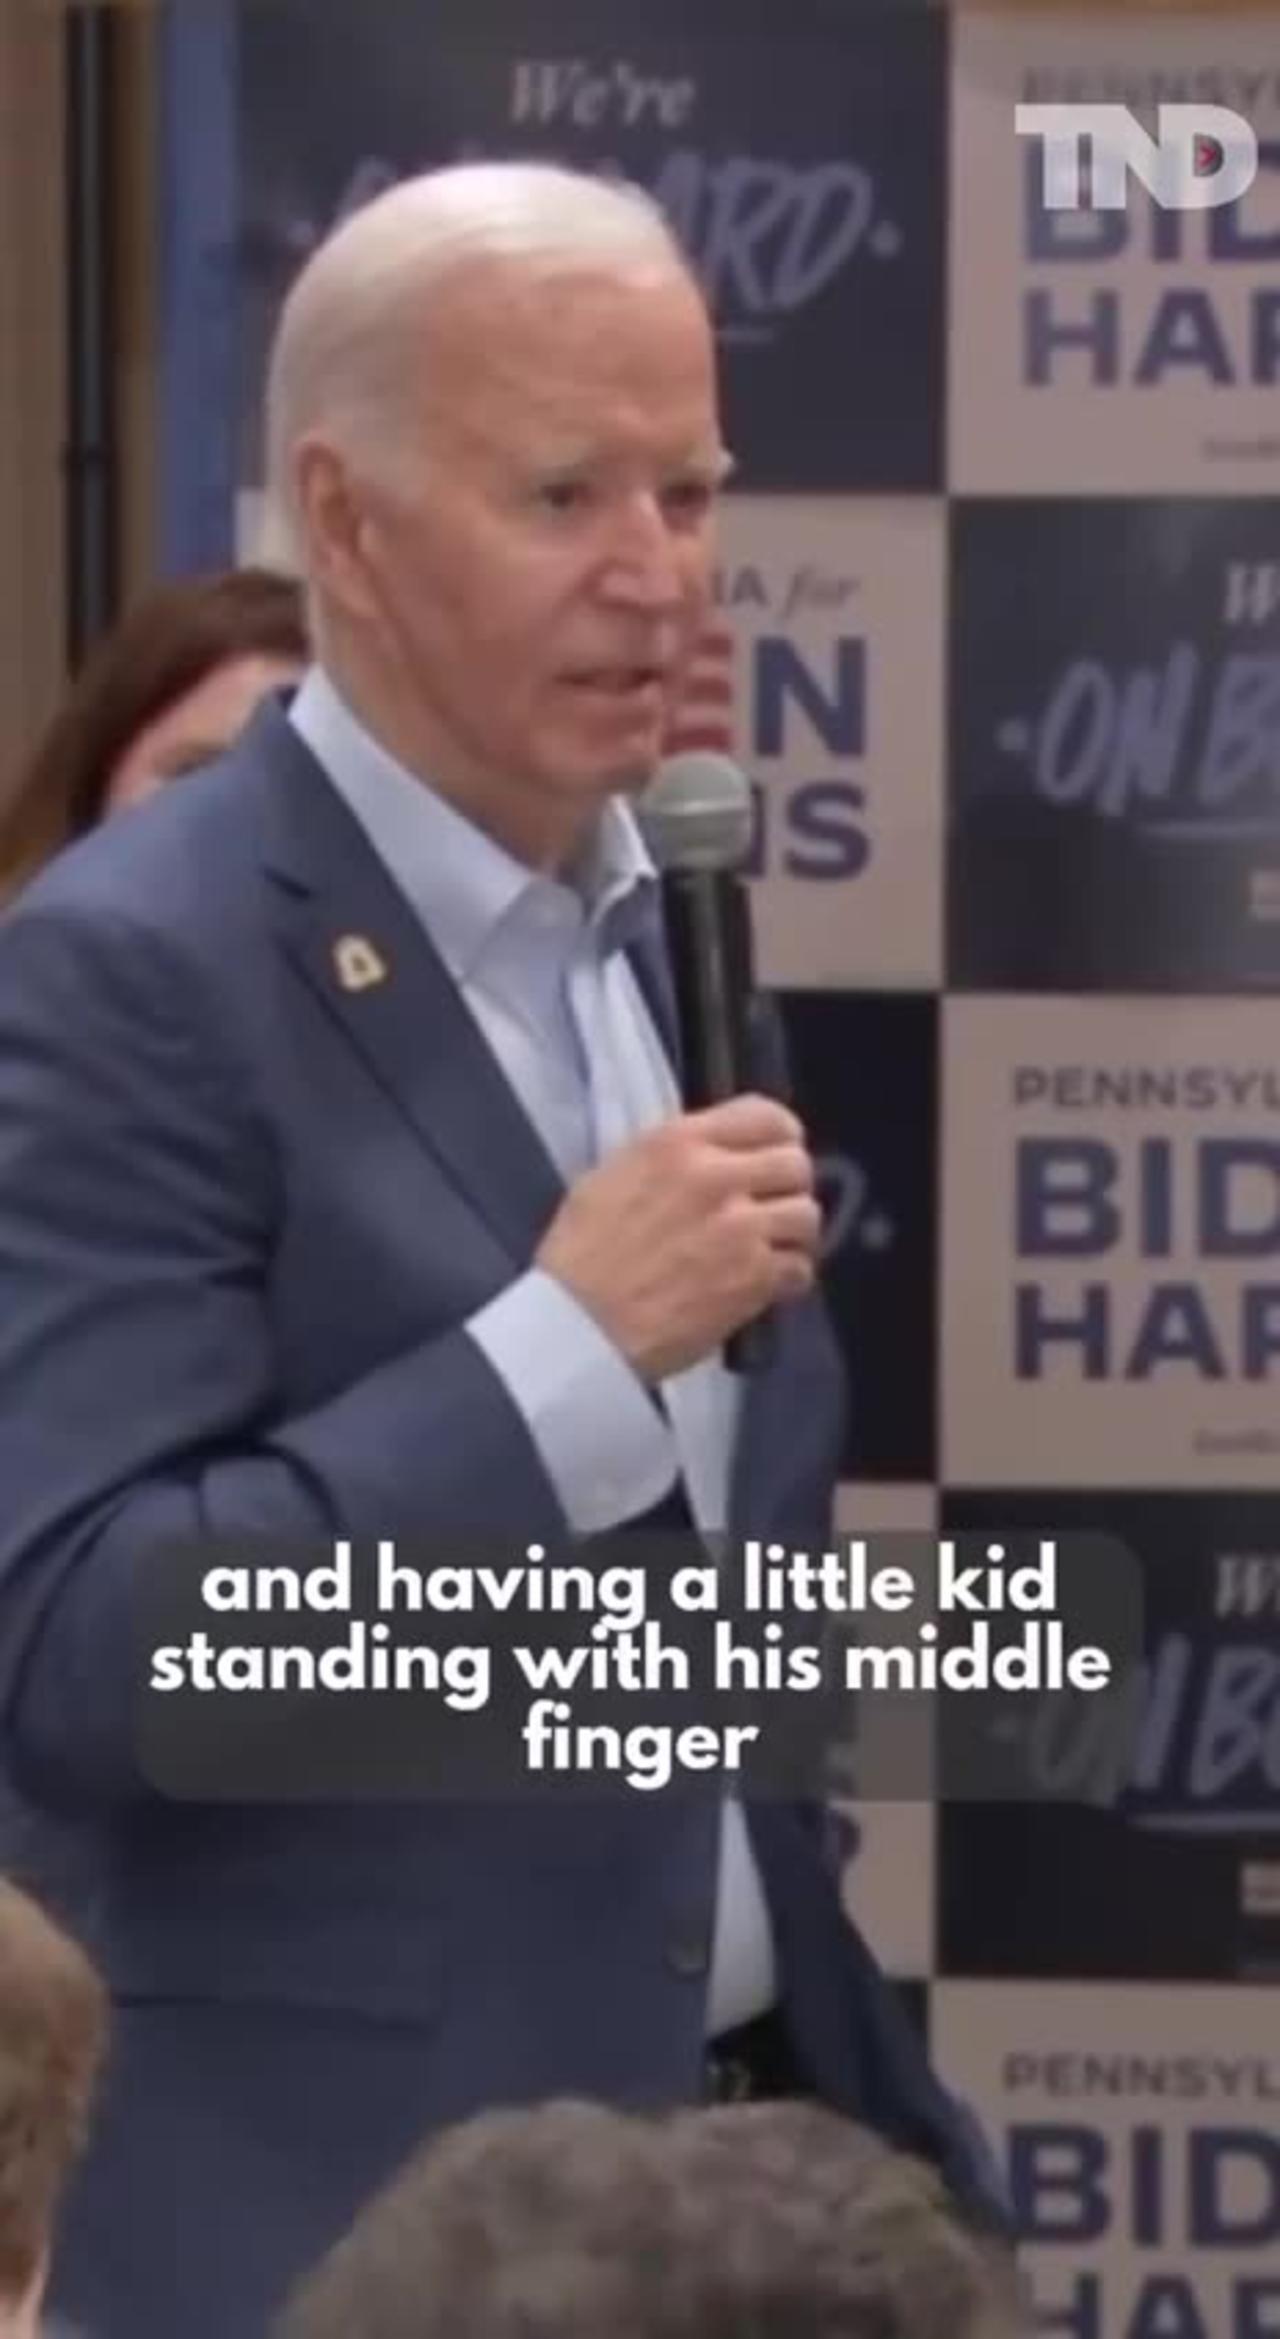 Joe Biden whines about "F Joe Biden" Signs as he forgets about calling Citizens "Terrorists"